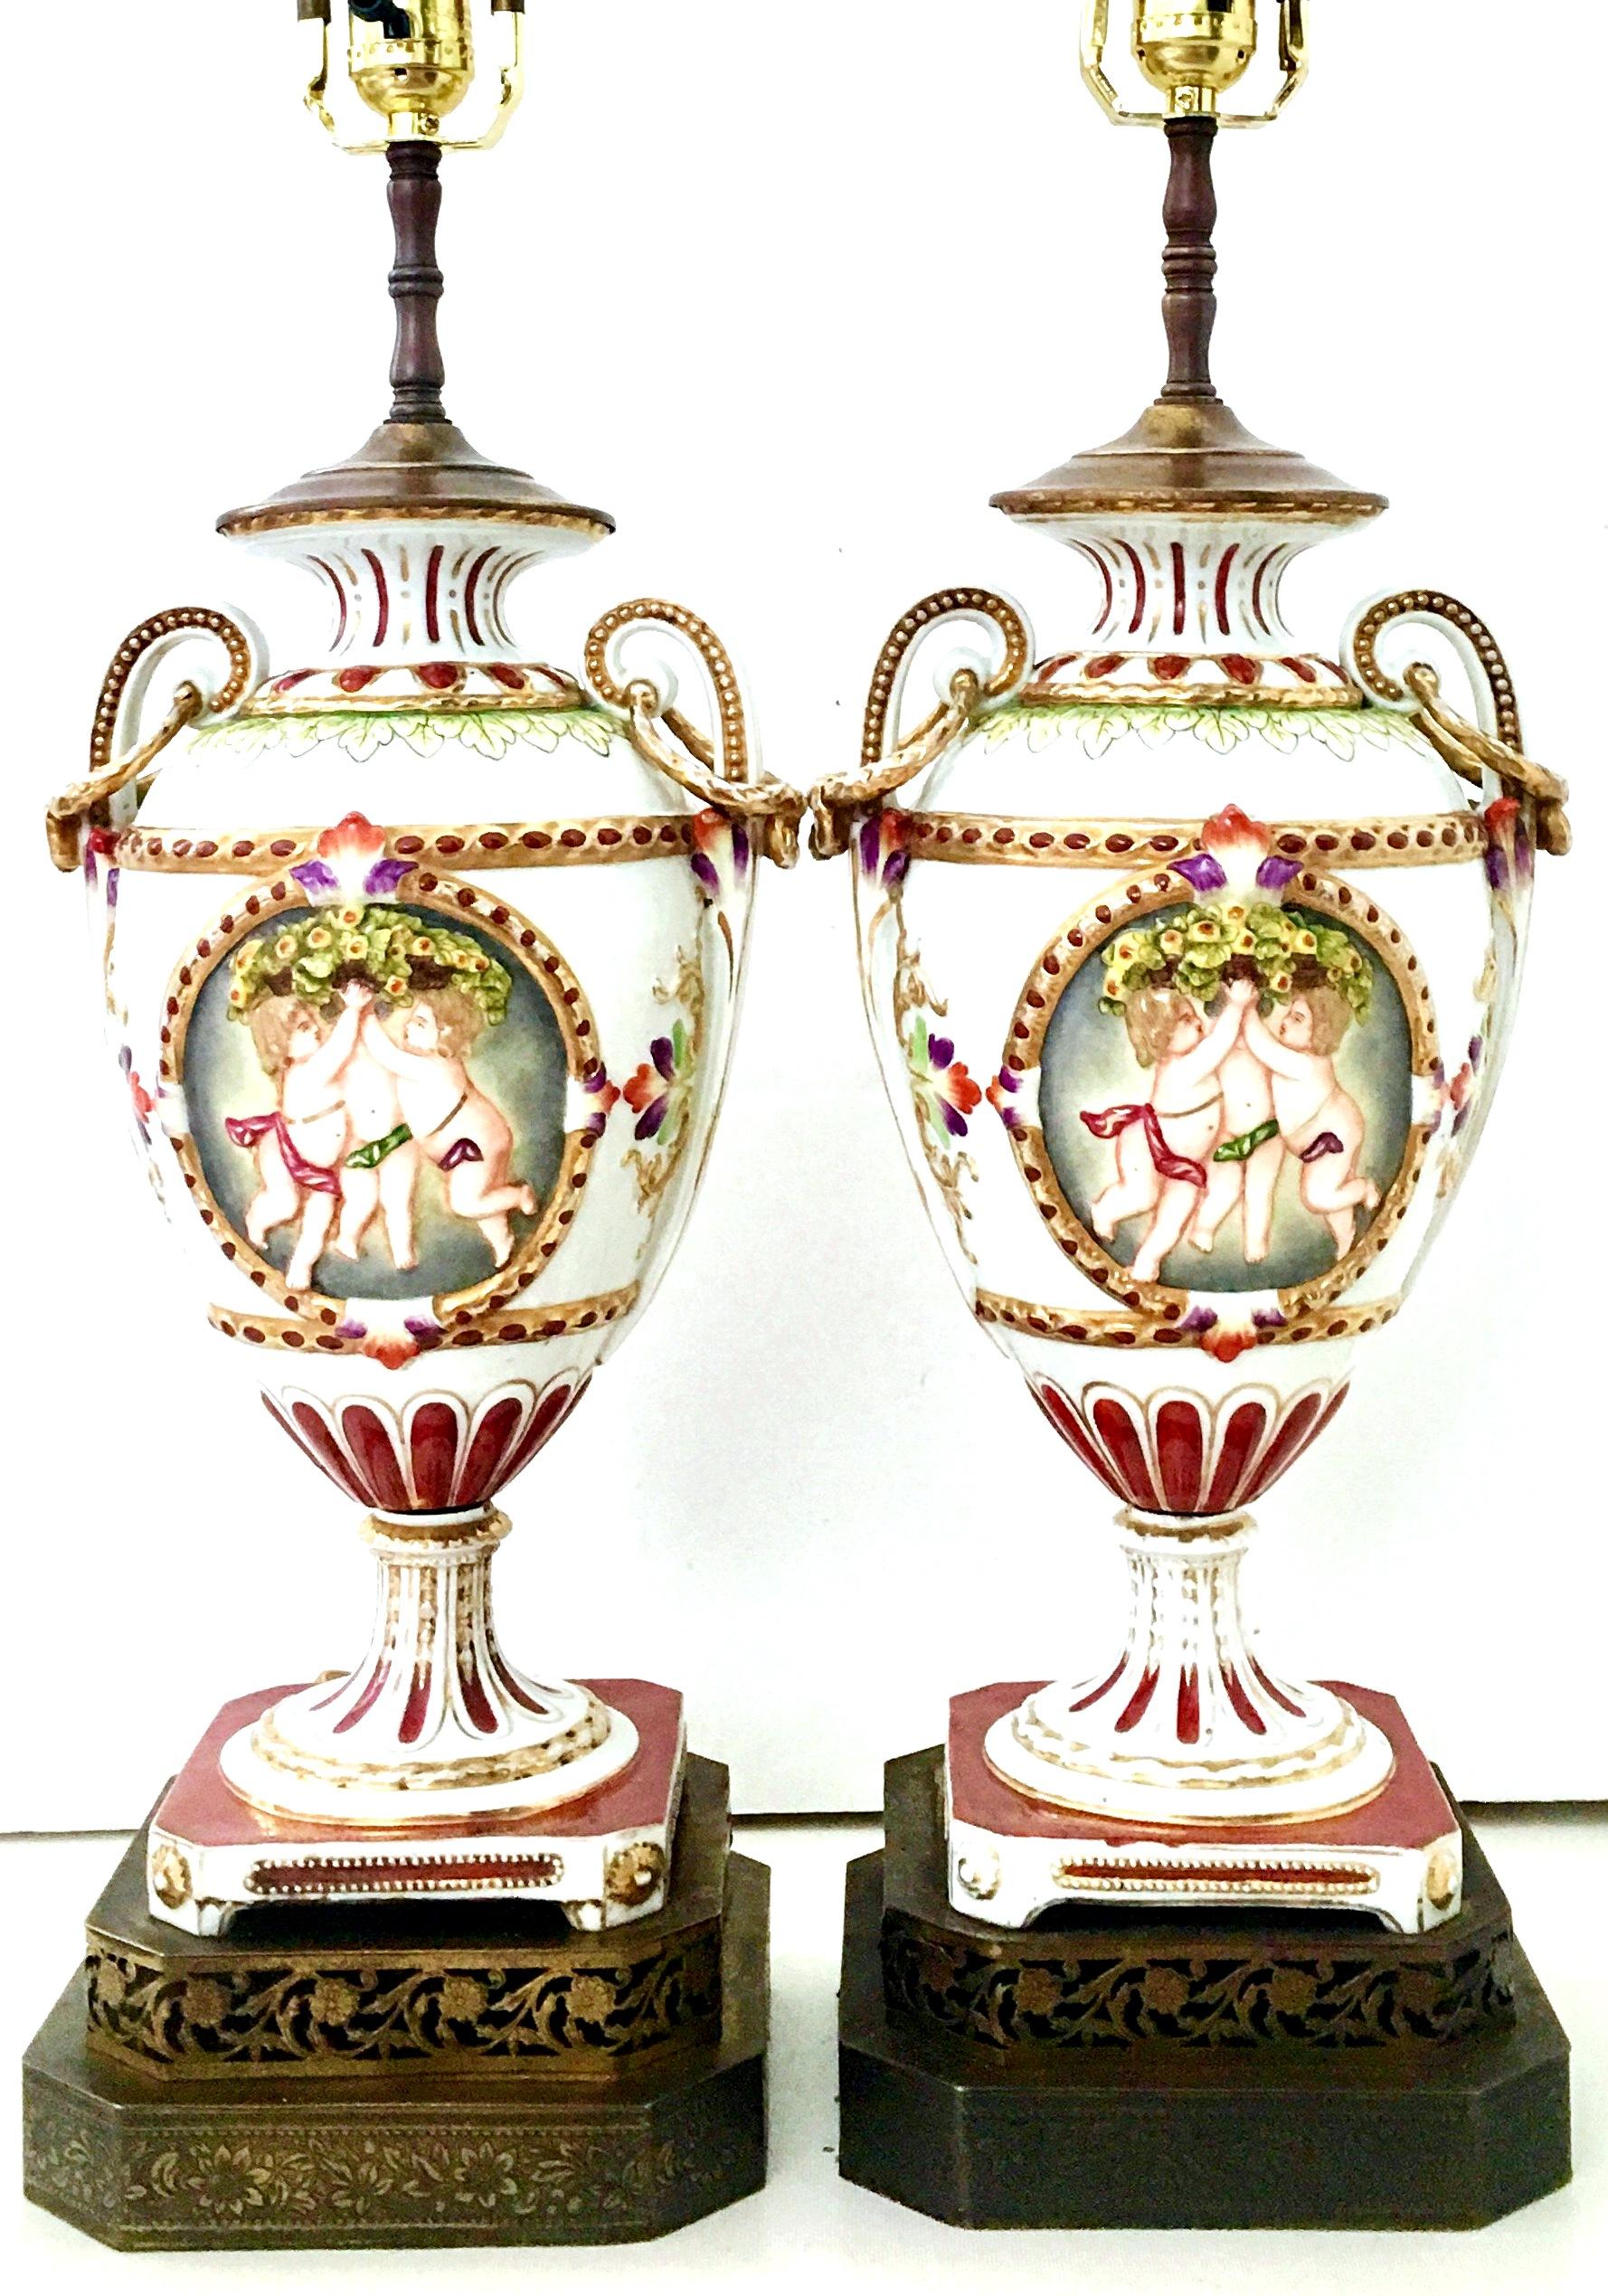 Neoclassical 19th Century Pair Of Royal Vienna Style Porcelain Hand-Painted Portrait Lamps For Sale